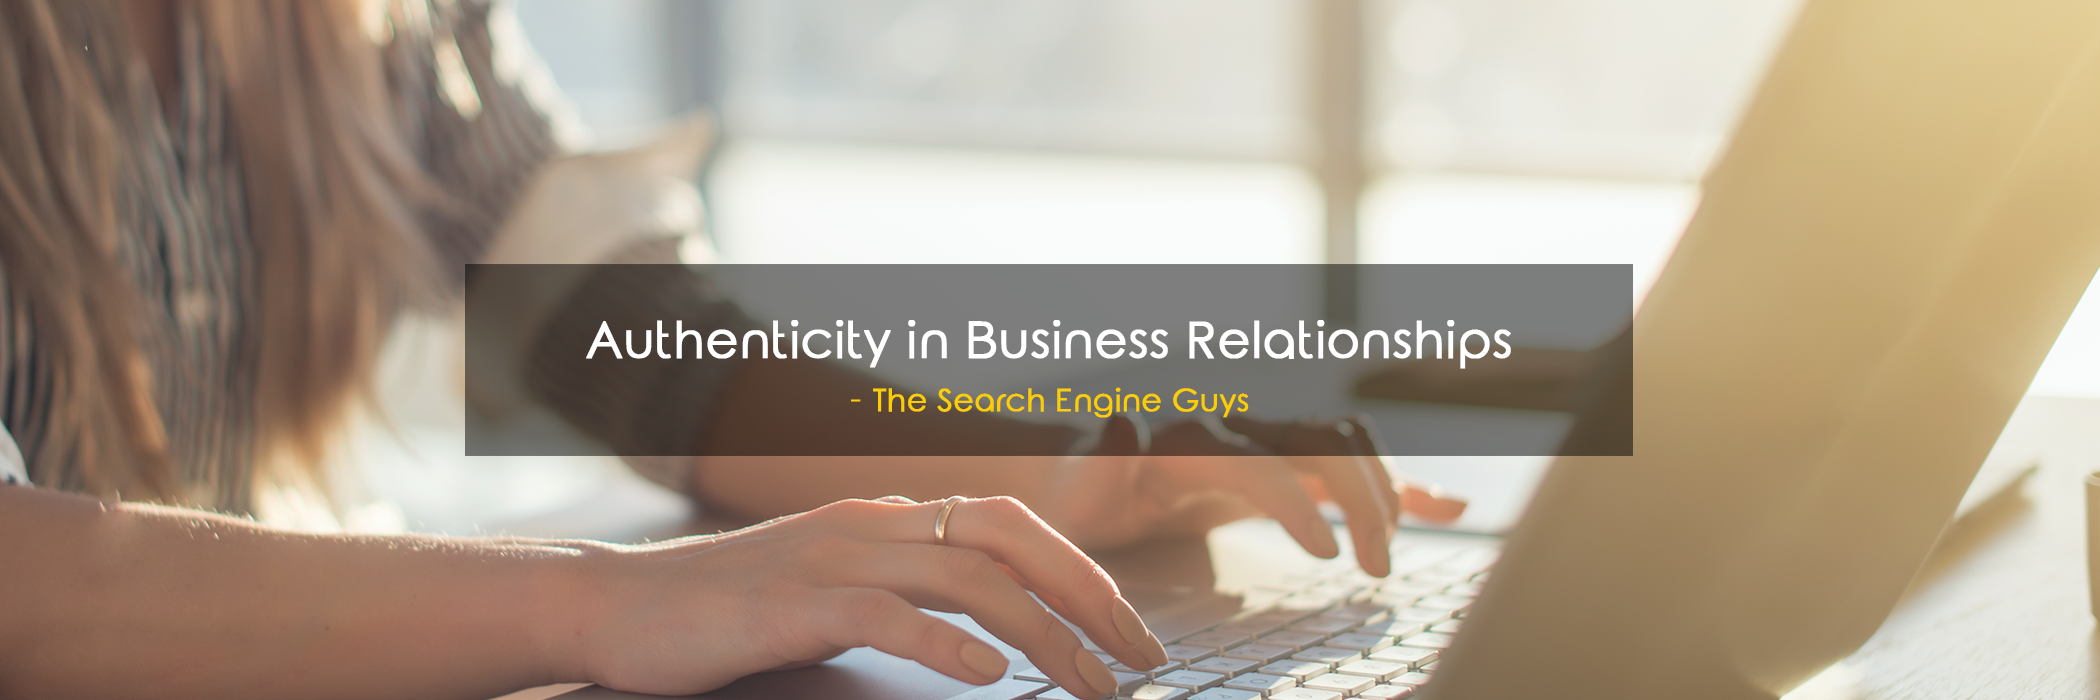 Authenticity in Business Relationships